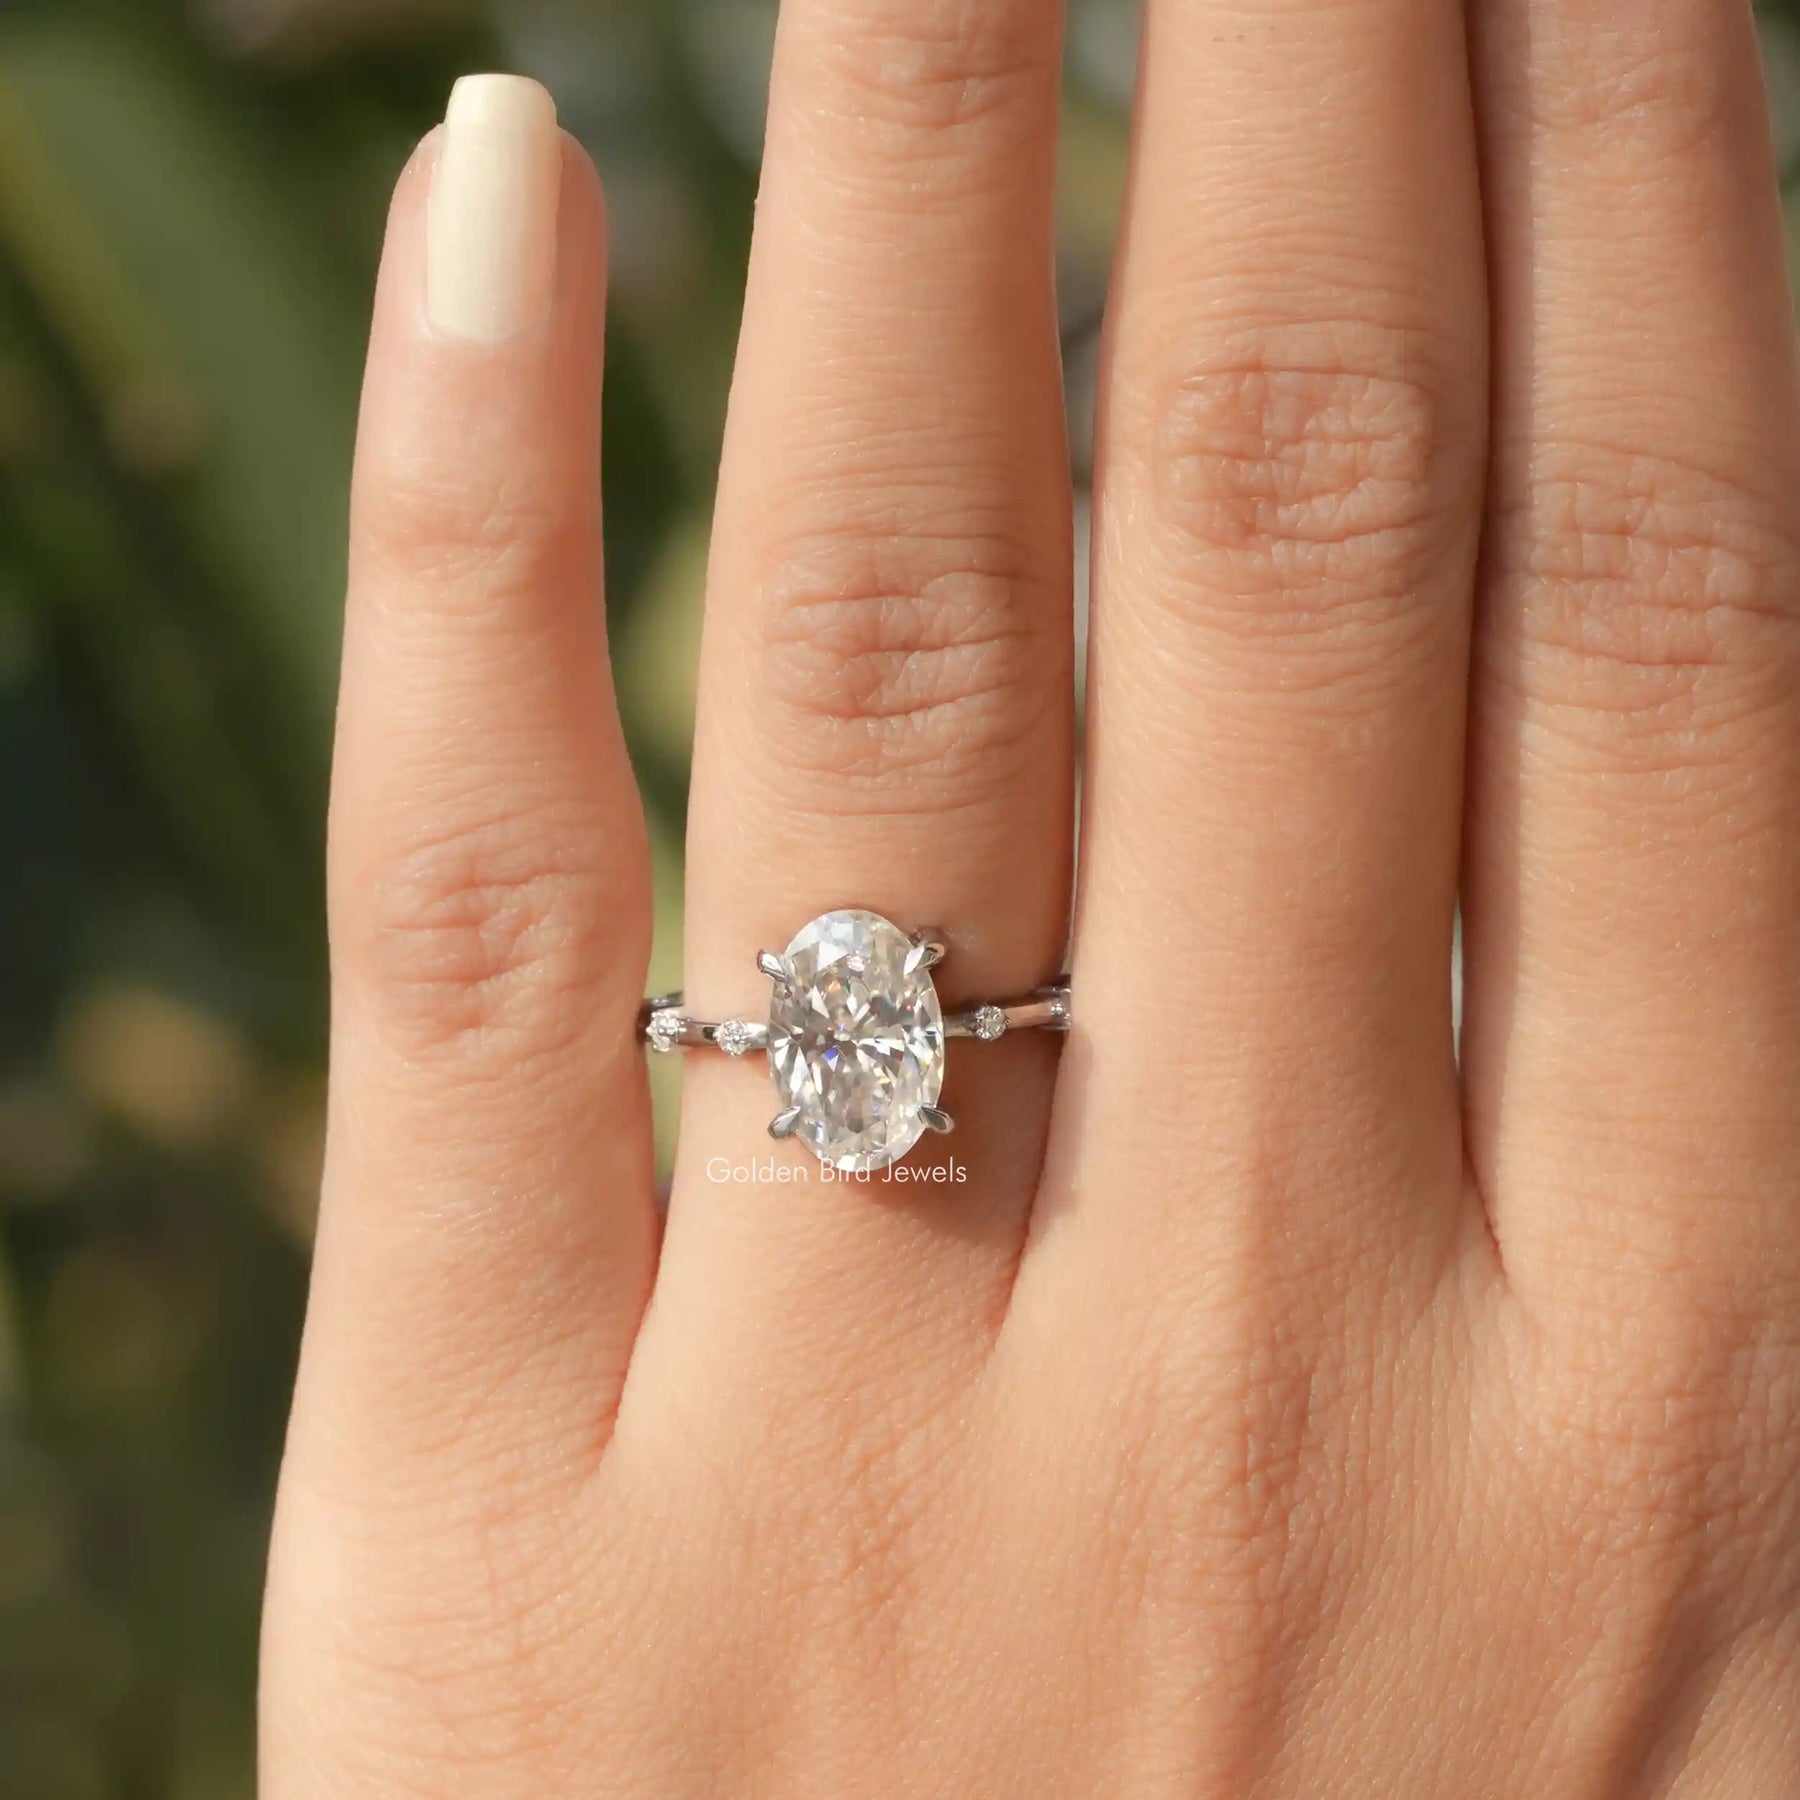 [In finger front view of oval moissanite engagement ring made of 14k white gold]-[Golden Bird Jewels]